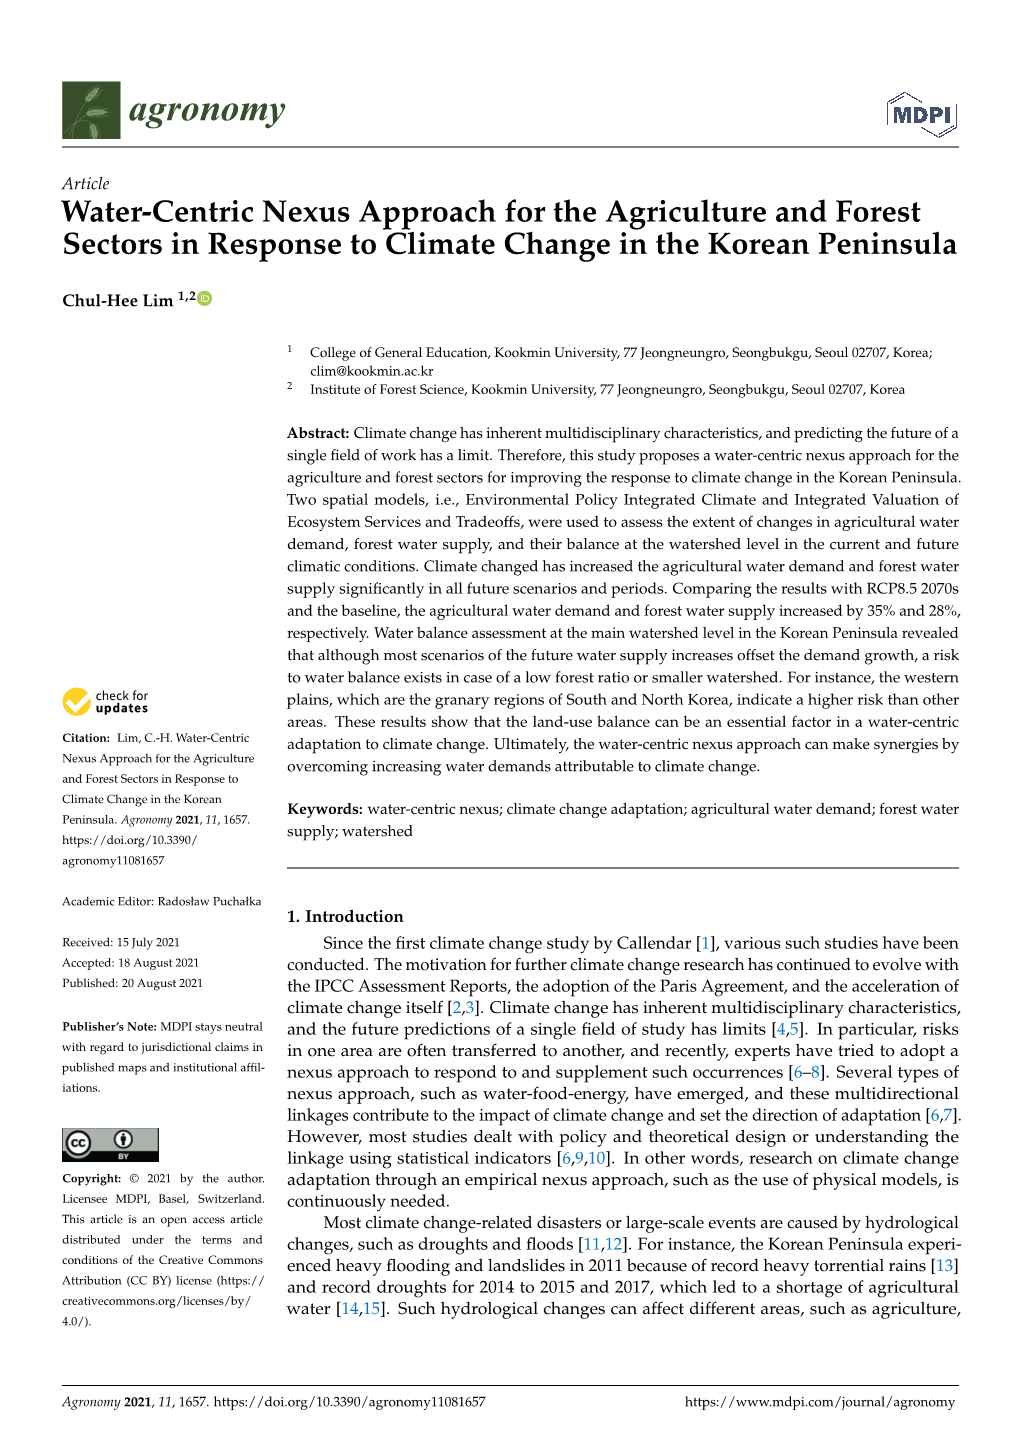 Water-Centric Nexus Approach for the Agriculture and Forest Sectors in Response to Climate Change in the Korean Peninsula